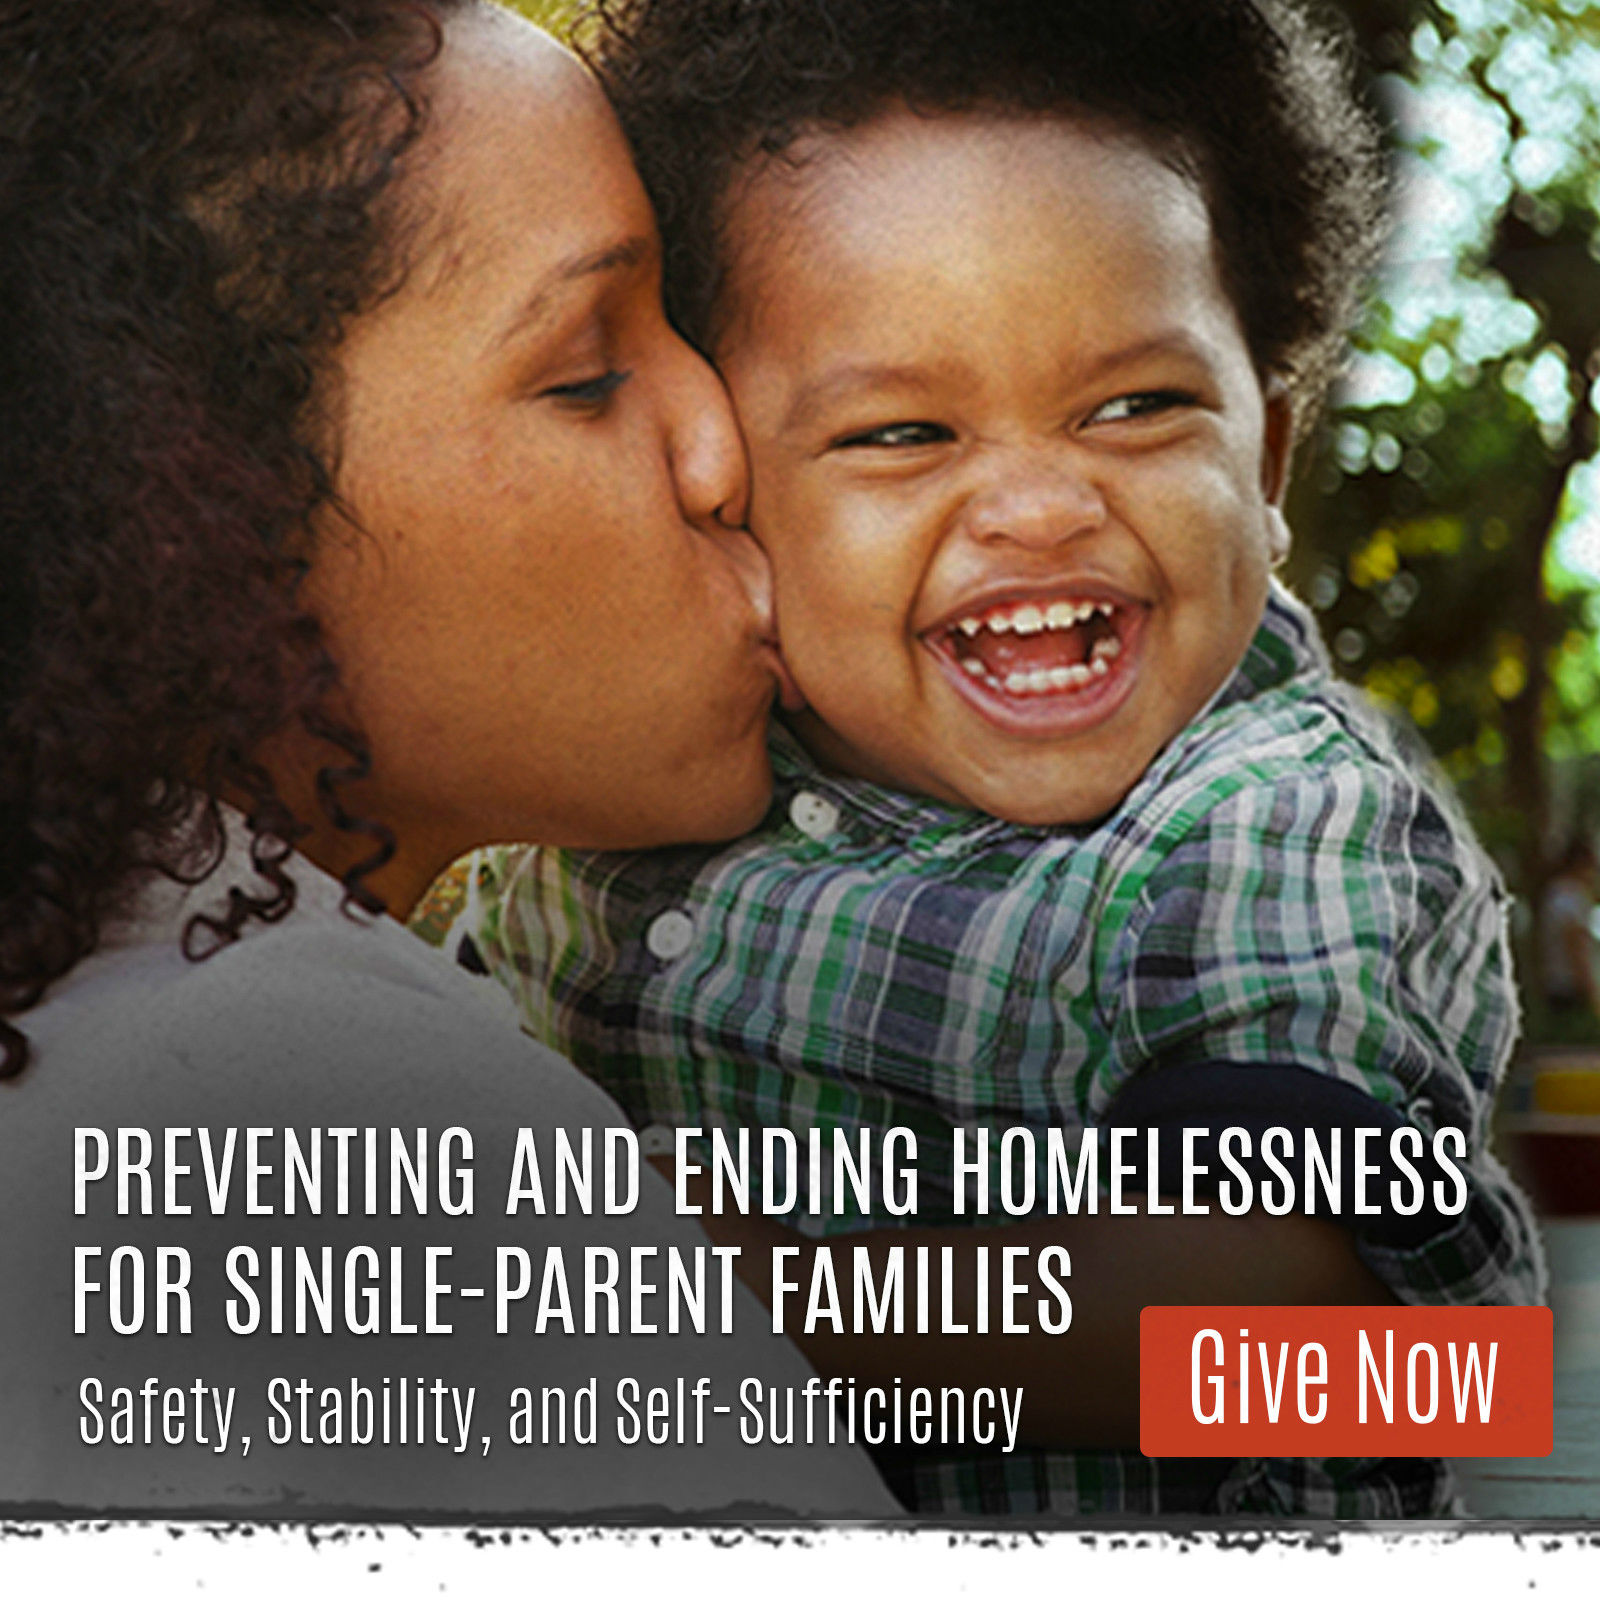 Mom kissing smiling baby - Click to give and provide safety, stability and self-sufficiency for families facing homelessness. 